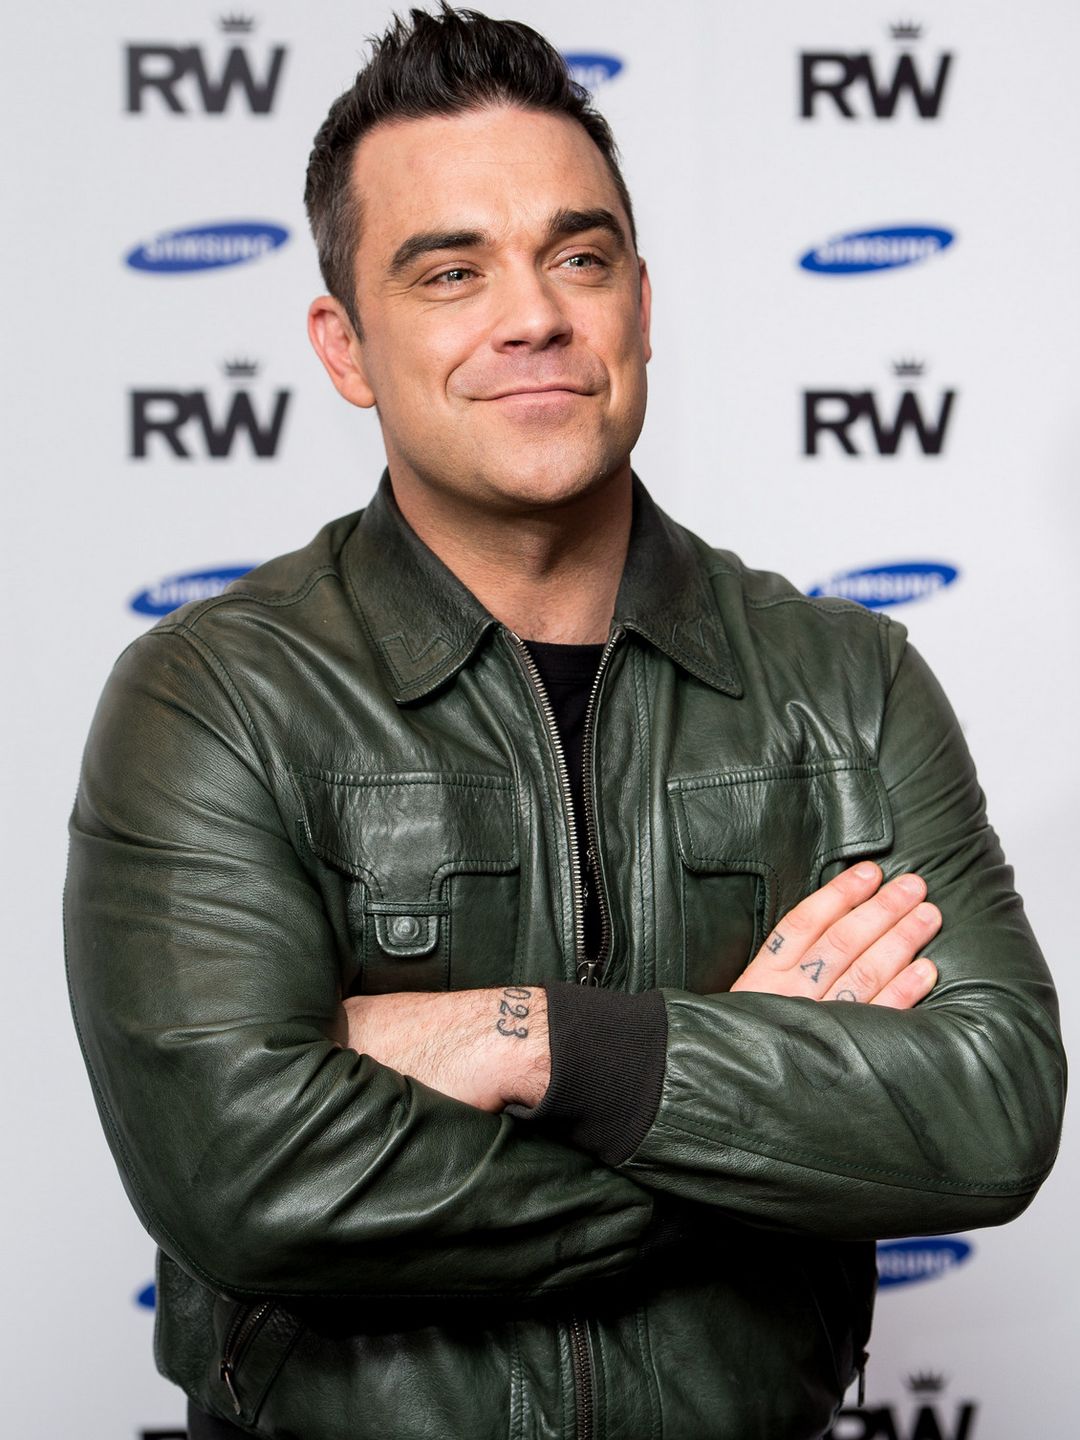 Robbie Williams interesting facts